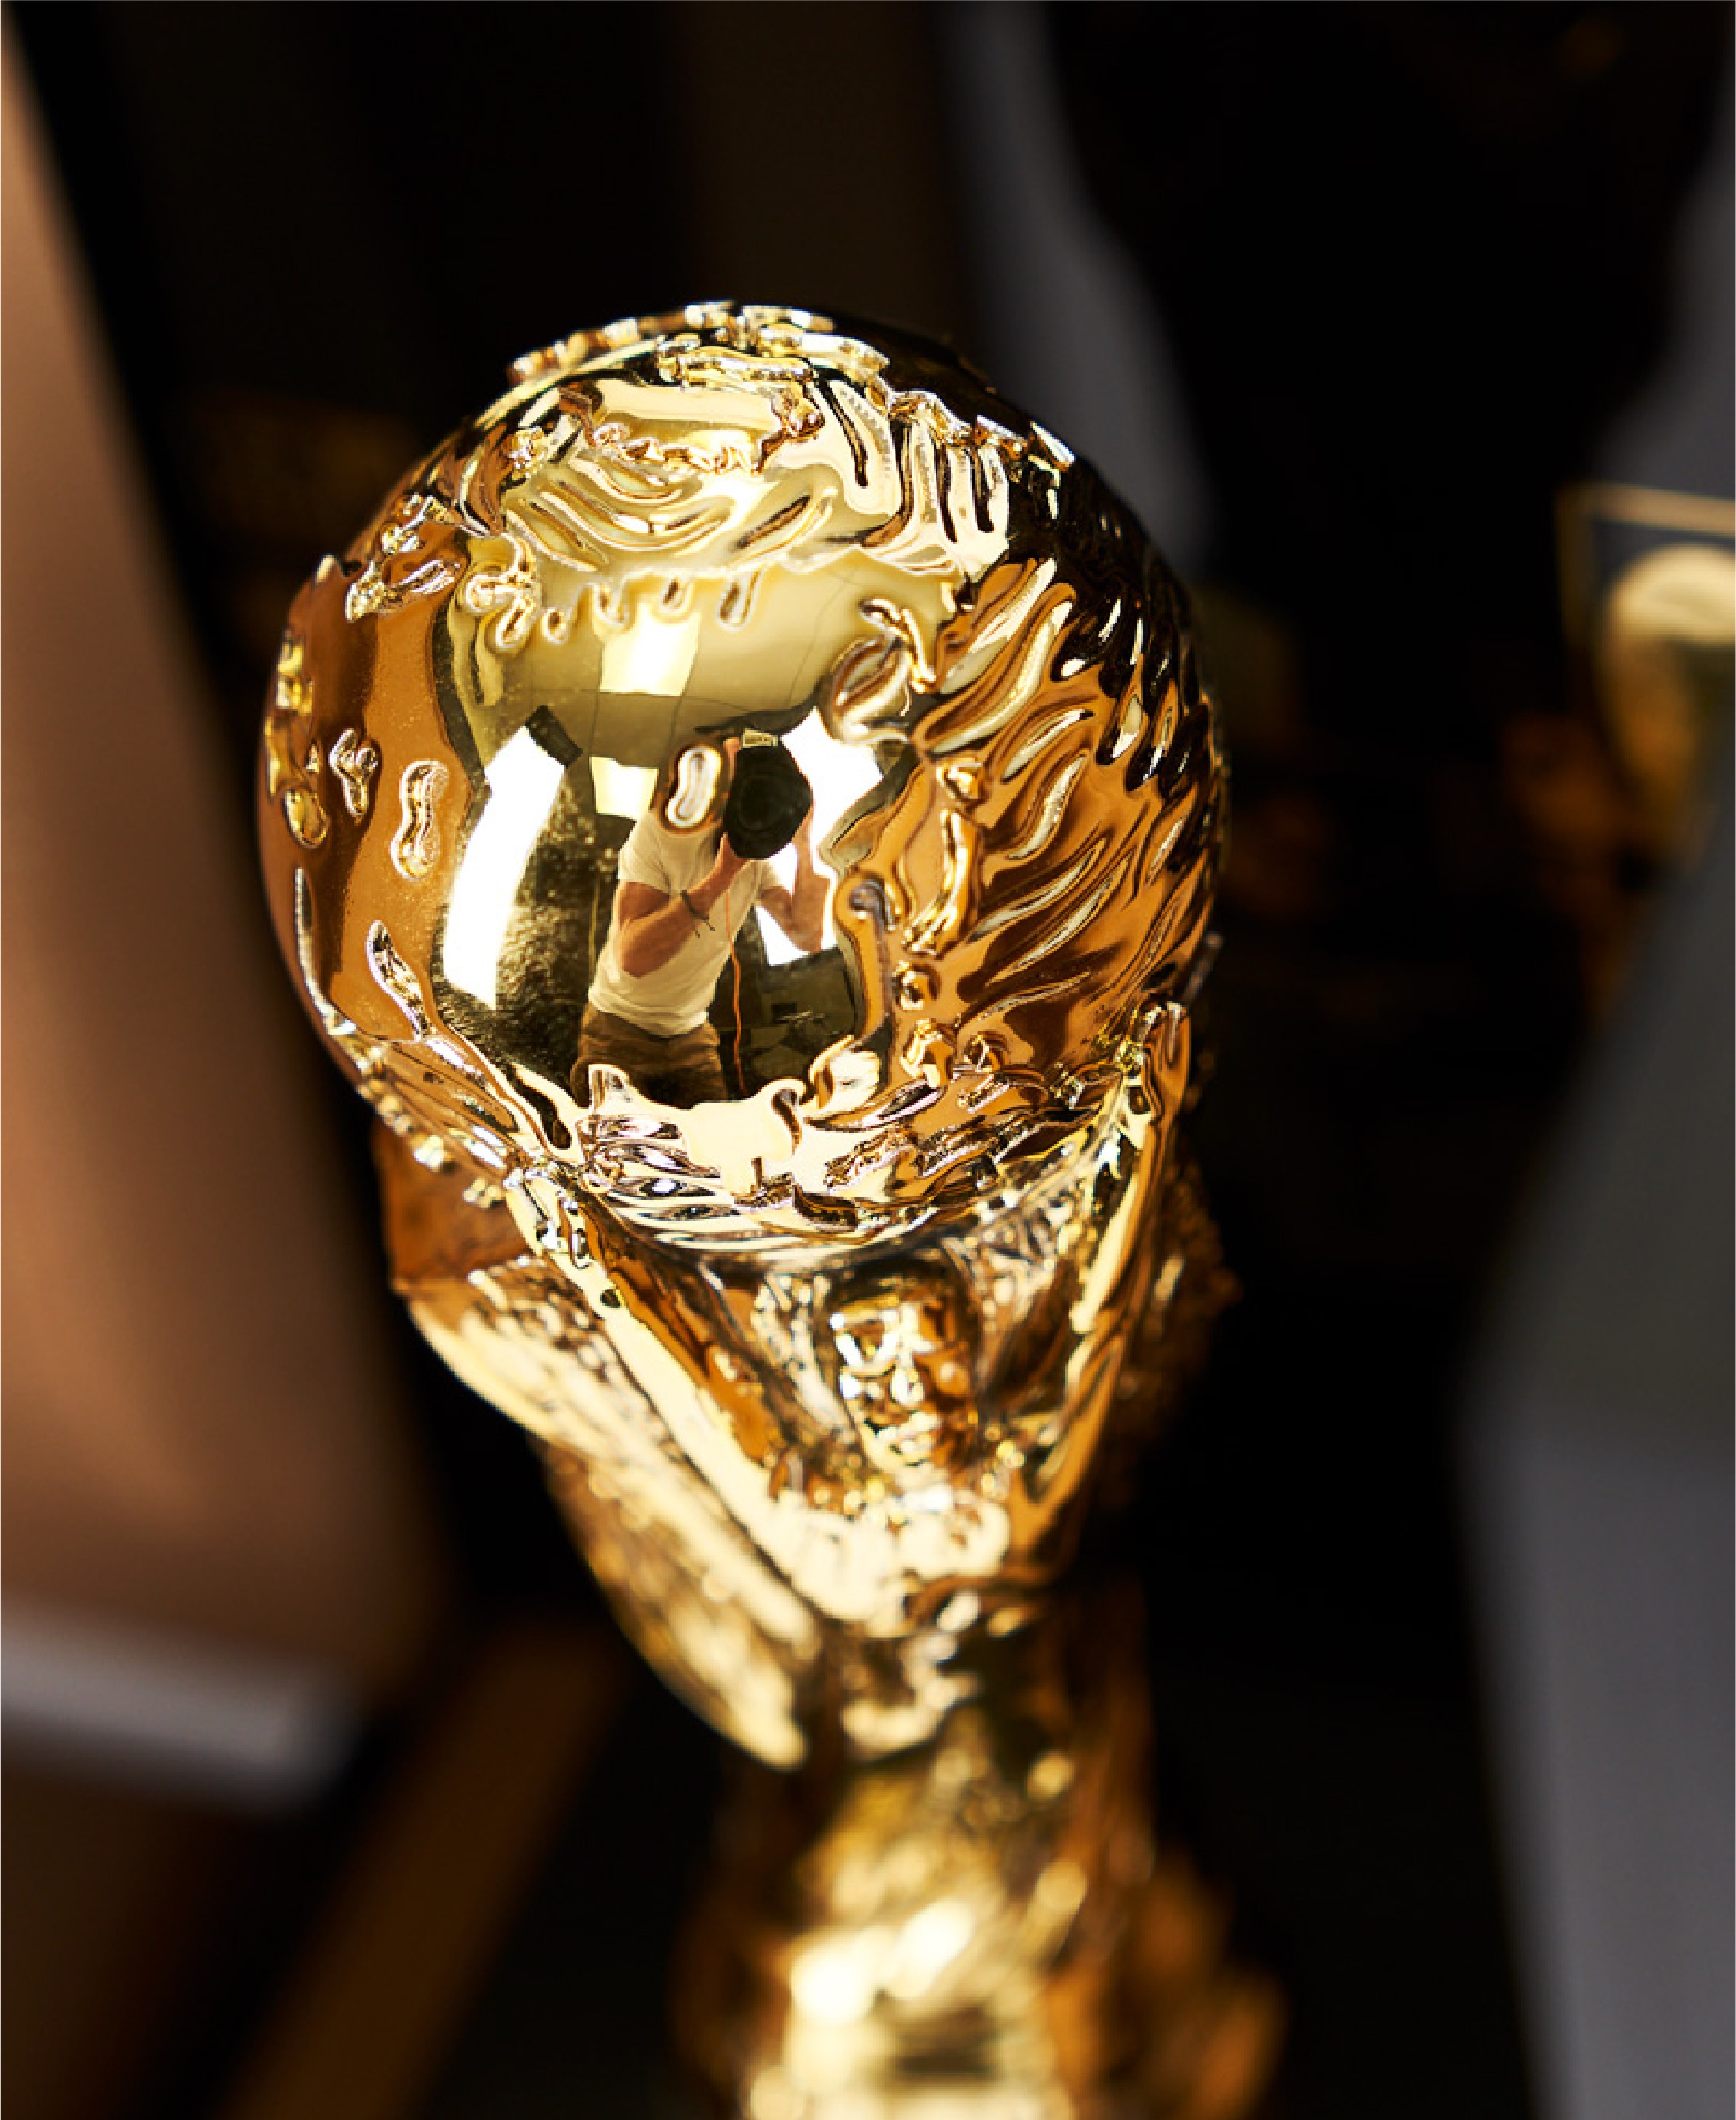 world cup trophy case 2022